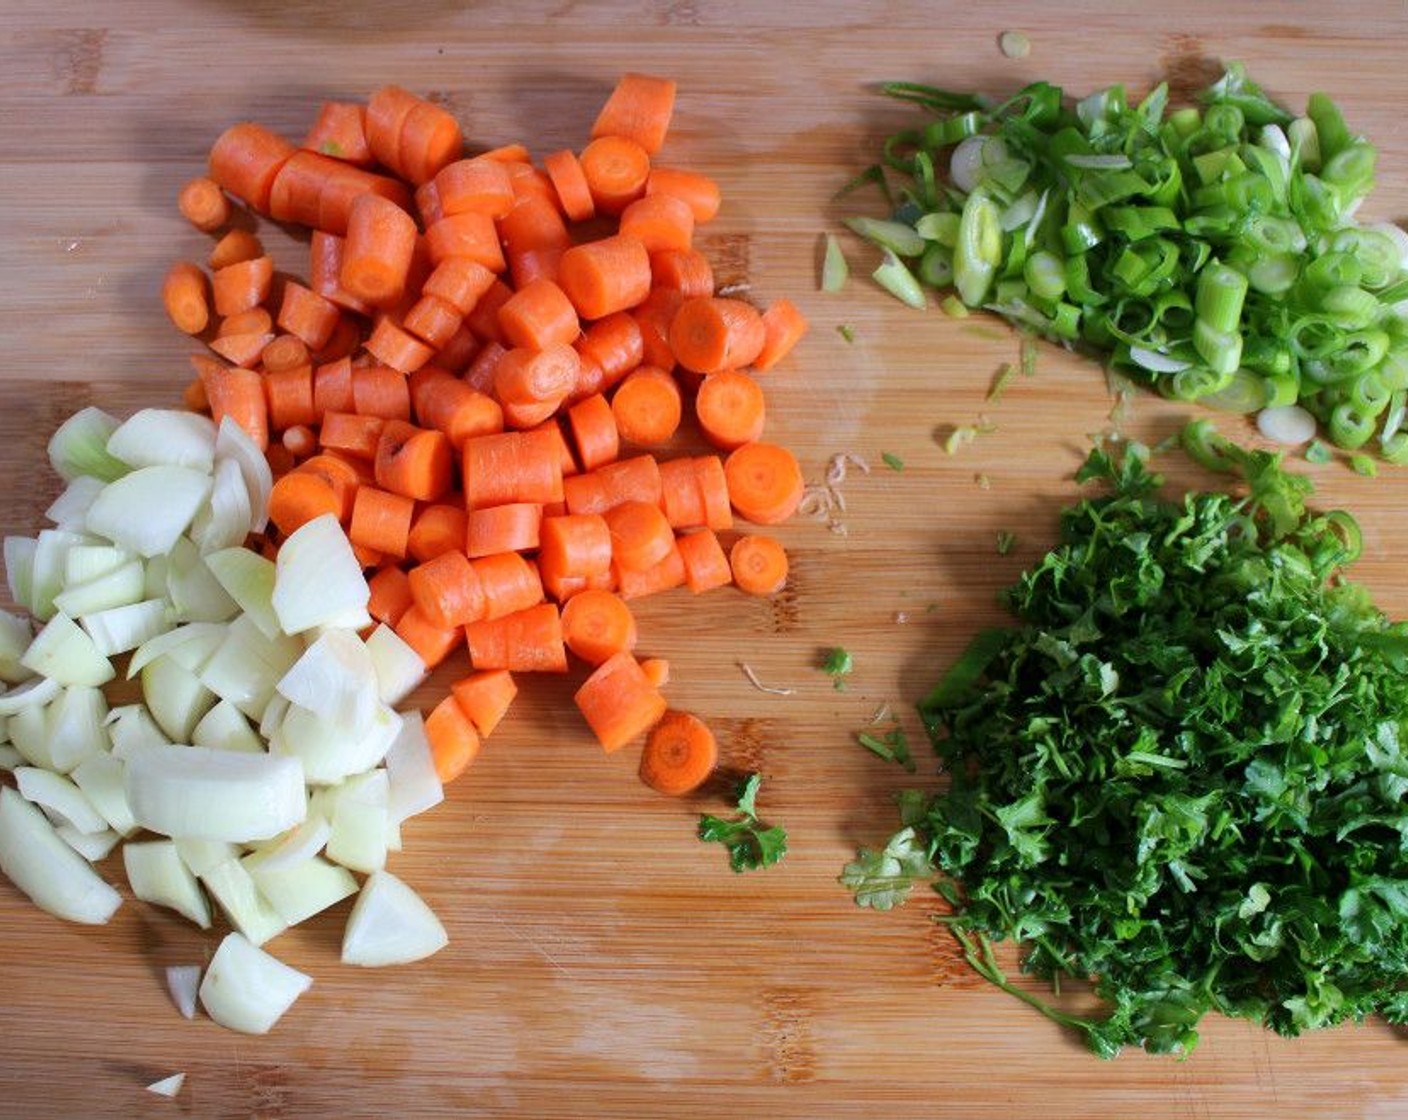 step 3 Cut Onions (2 cups), Carrots (2 cups), Scallion (1/2 cup), and Italian Flat-Leaf Parsley (1 cup).